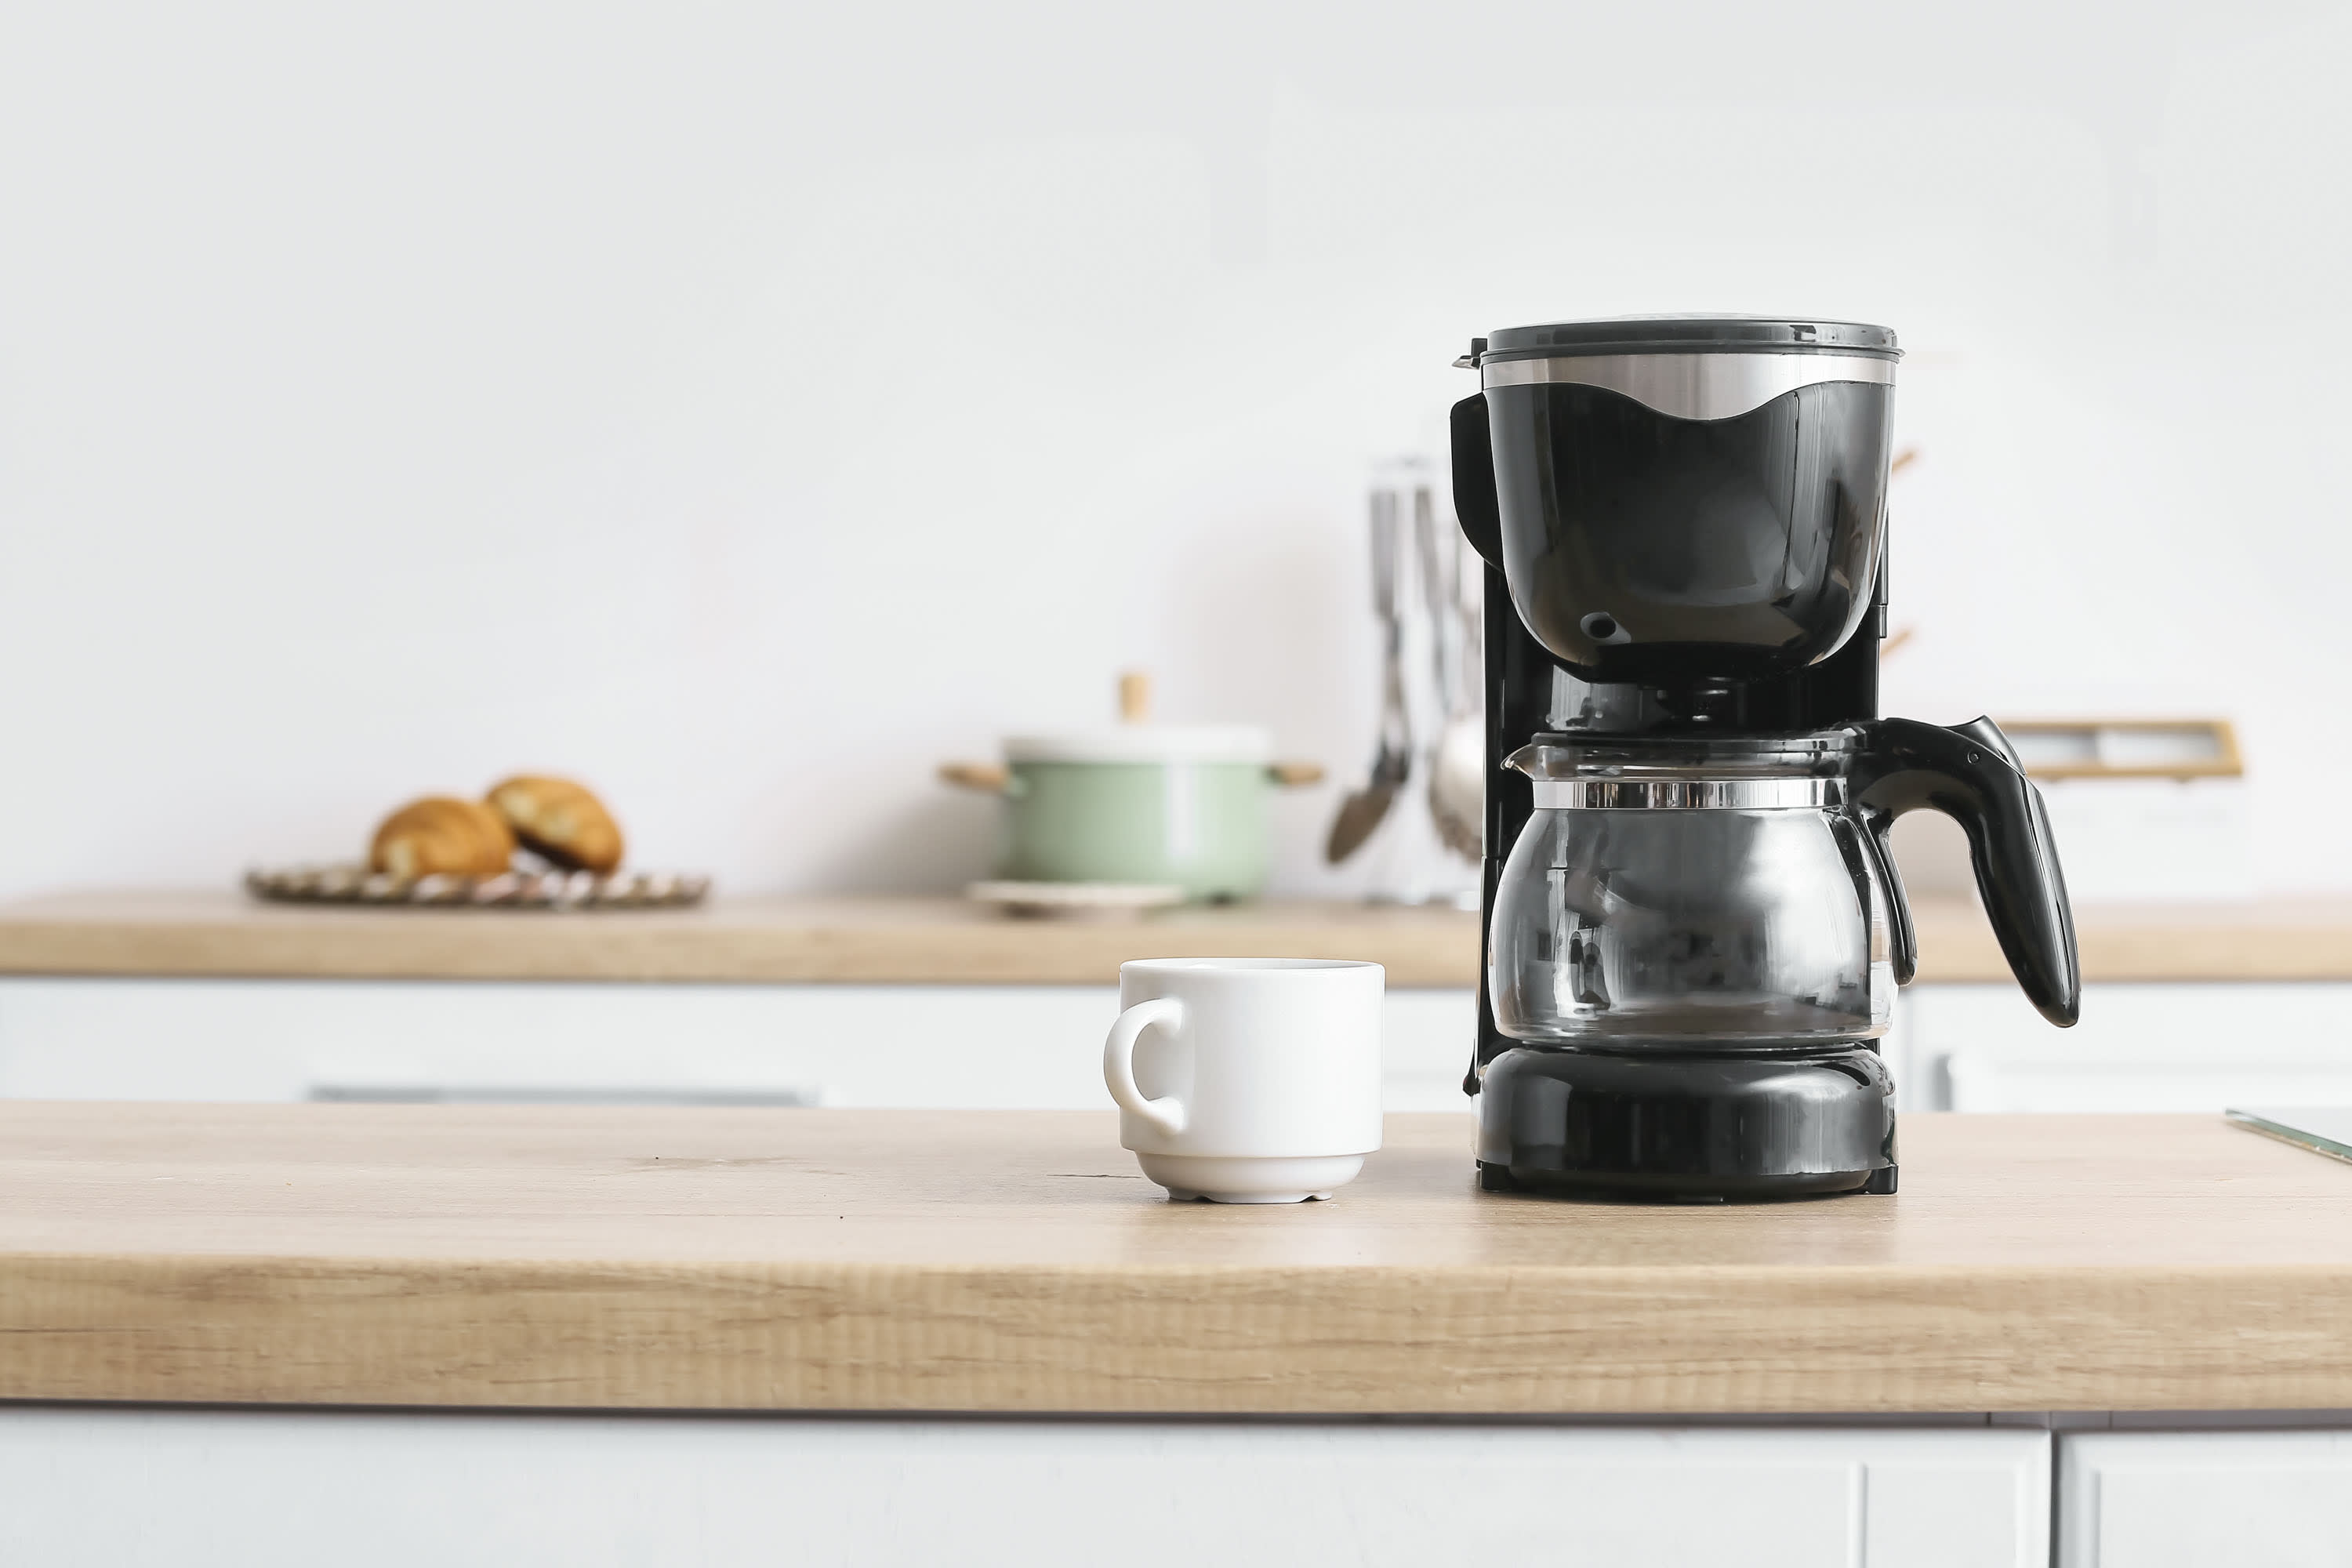 Indulge in the world's most-loved stovetop espresso maker